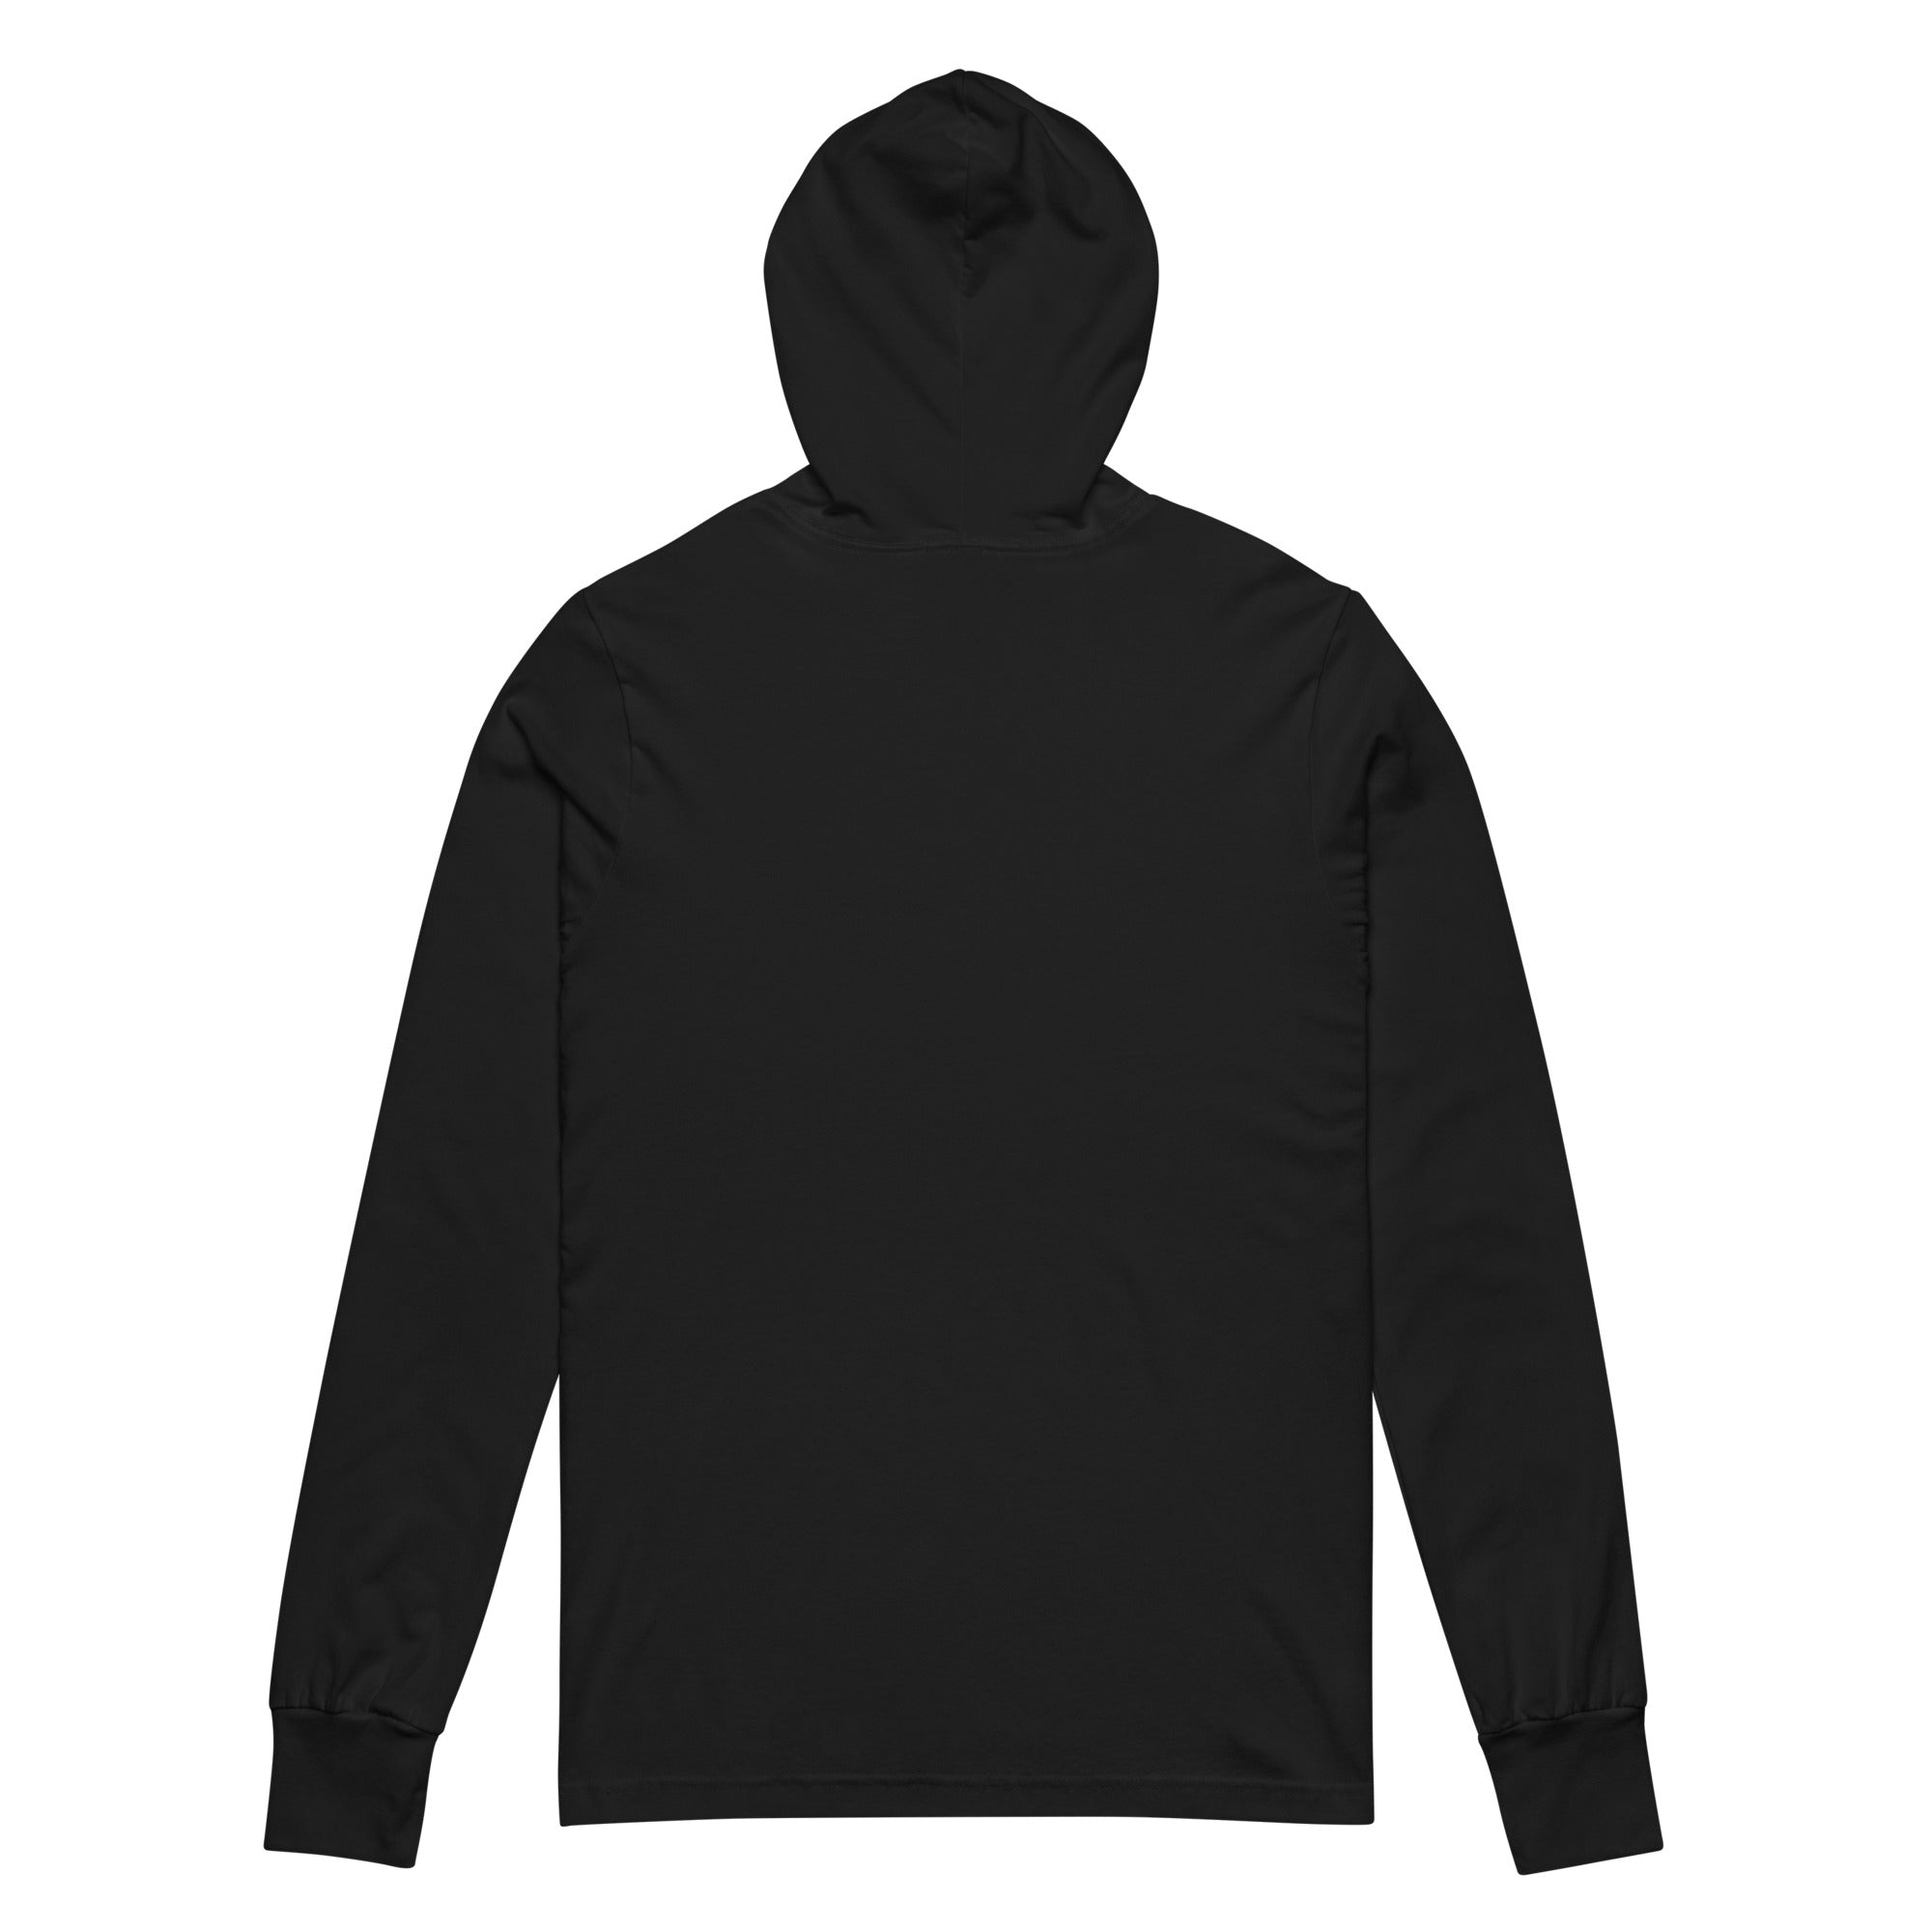 We Are the Carbon They Want To Reduce Hooded Long-Sleeve Tee